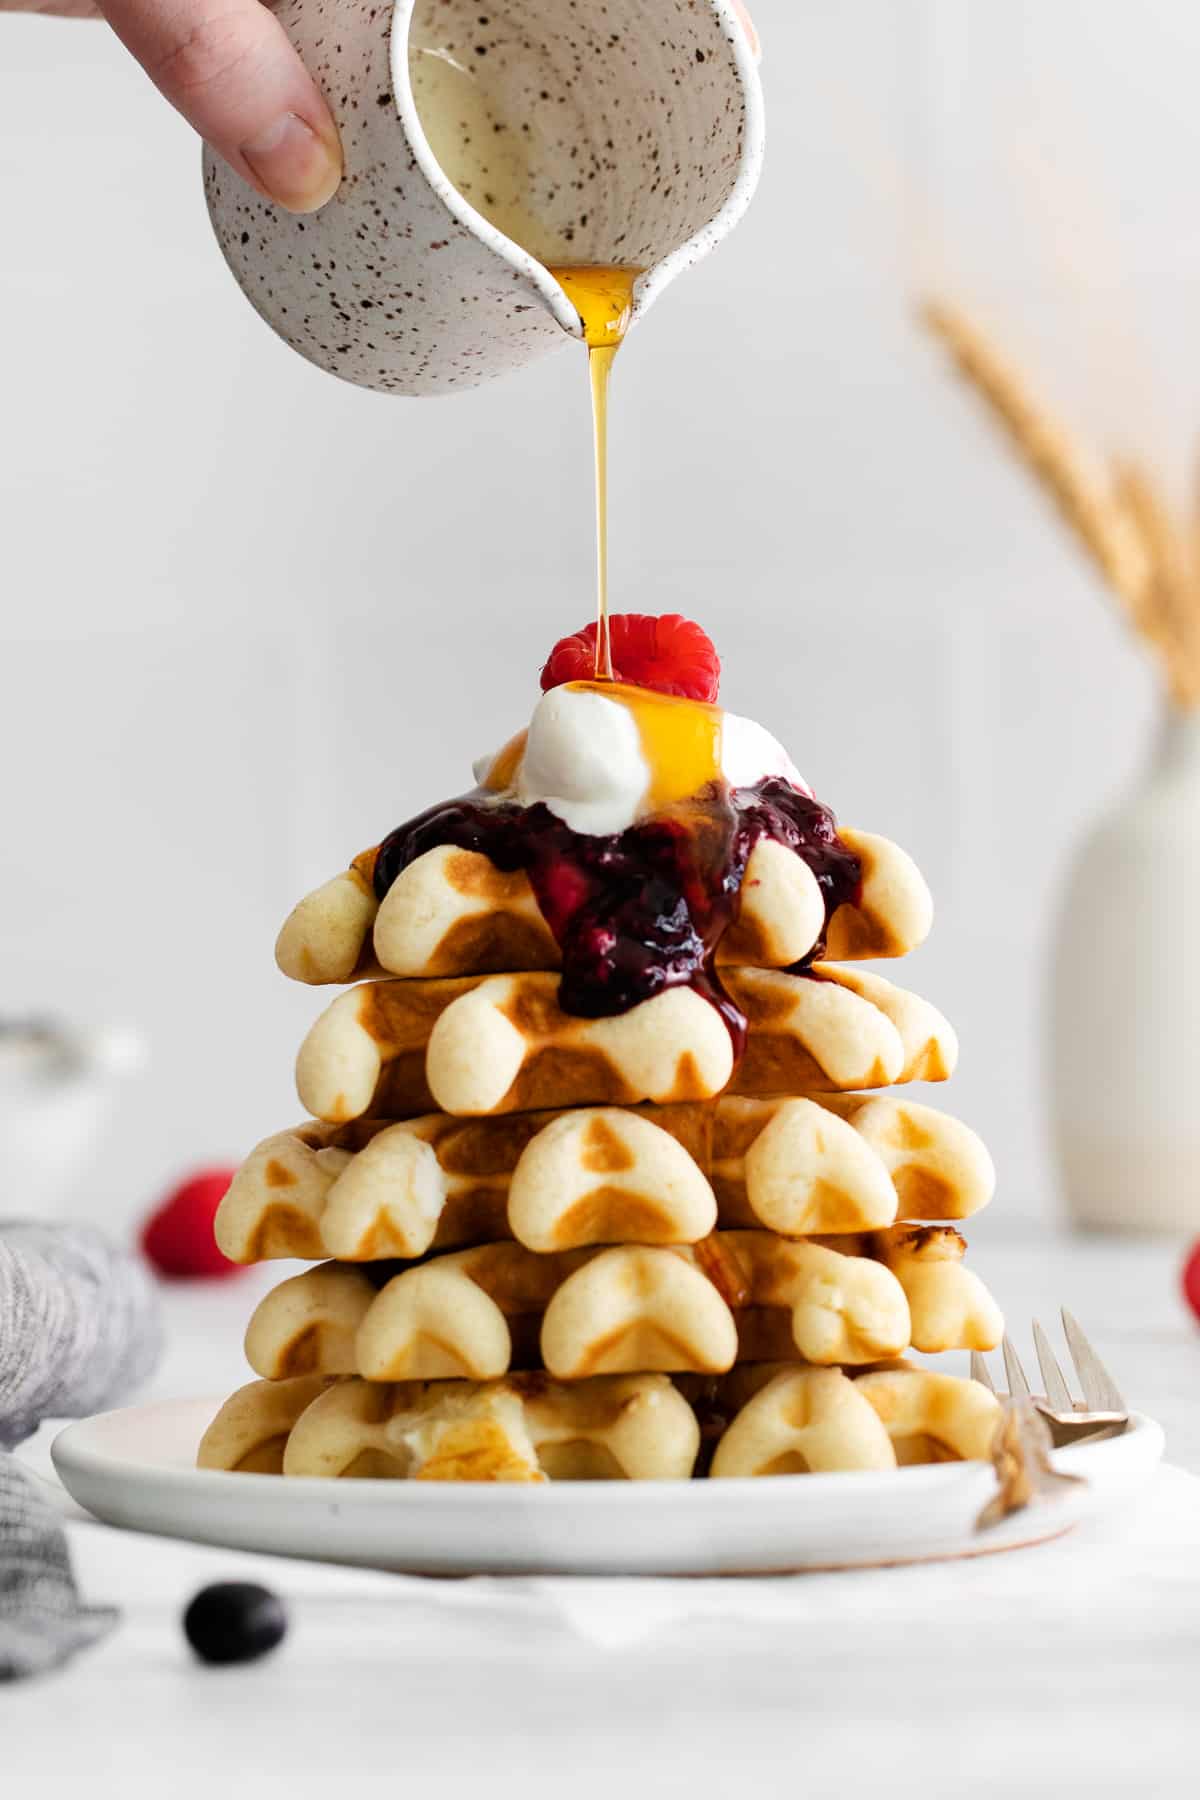 stack of waffles with berry compote and maple syrup.